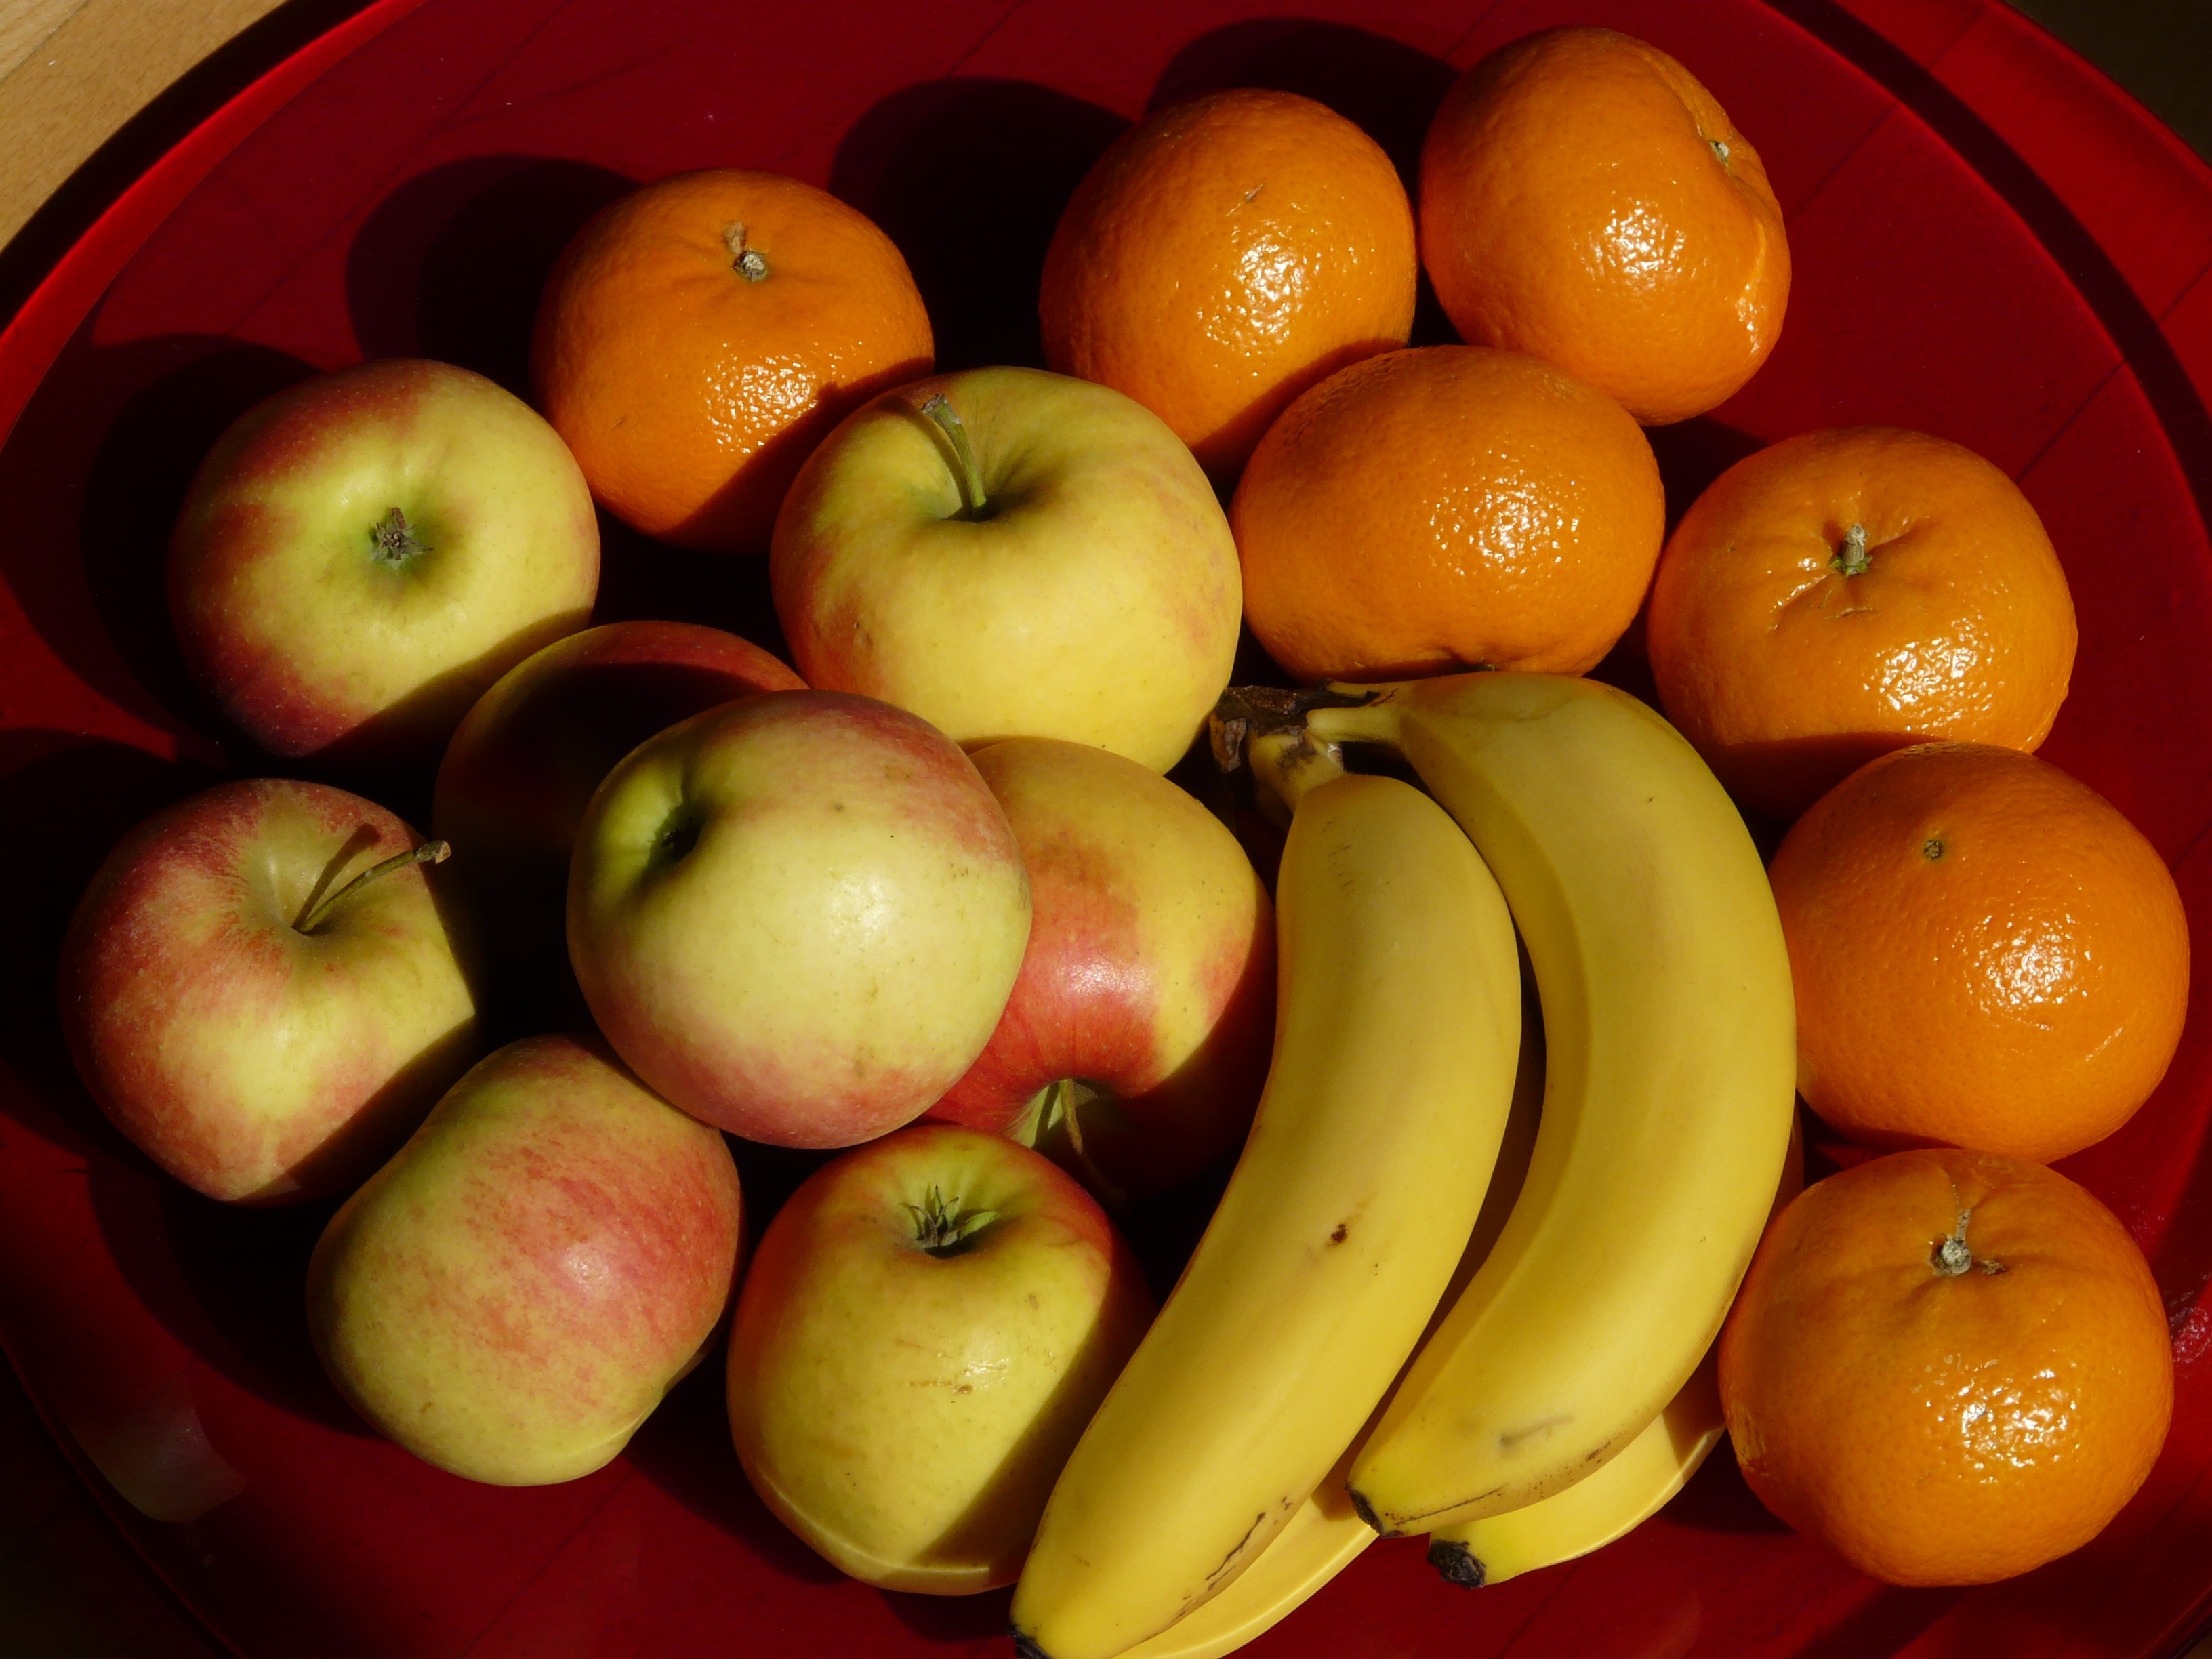 banana oranges and apples lot